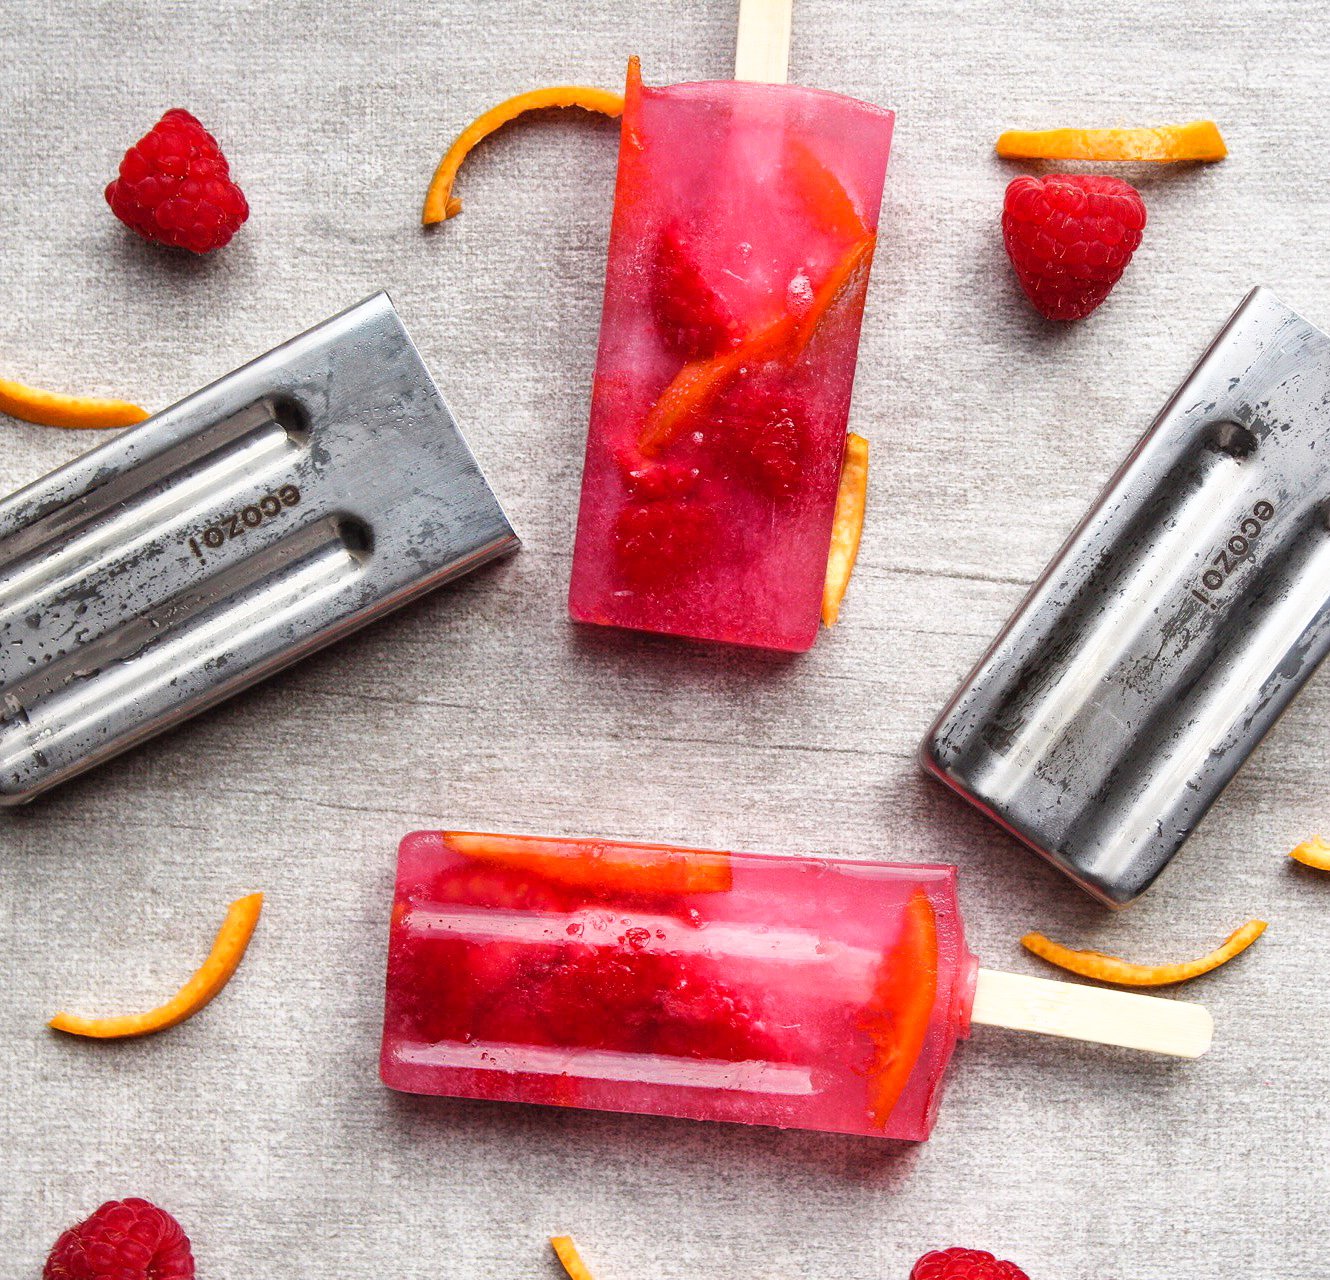 Switch to Stainless Steel Popsicle Molds Instead of Plastic » My  Plastic-free Life